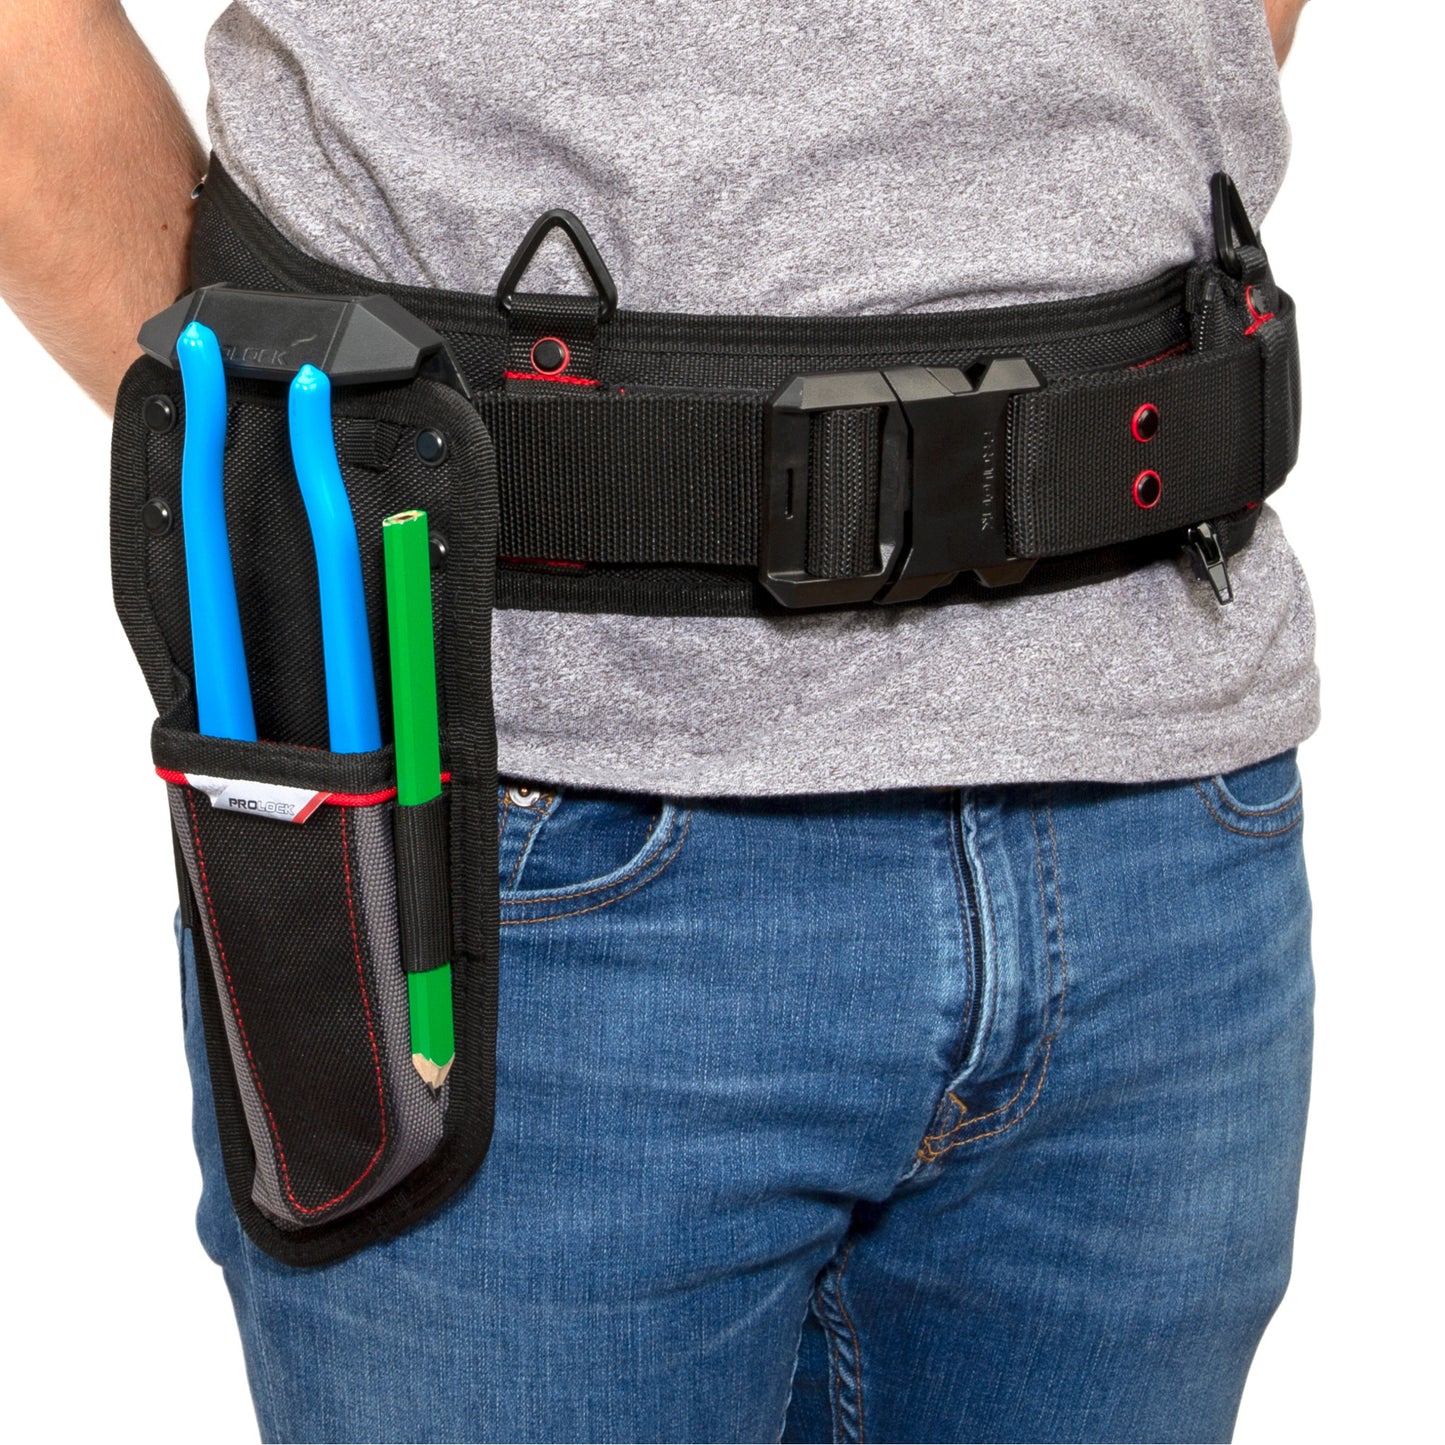 Extra Padded Sling Belt with Quick-Release Buckle